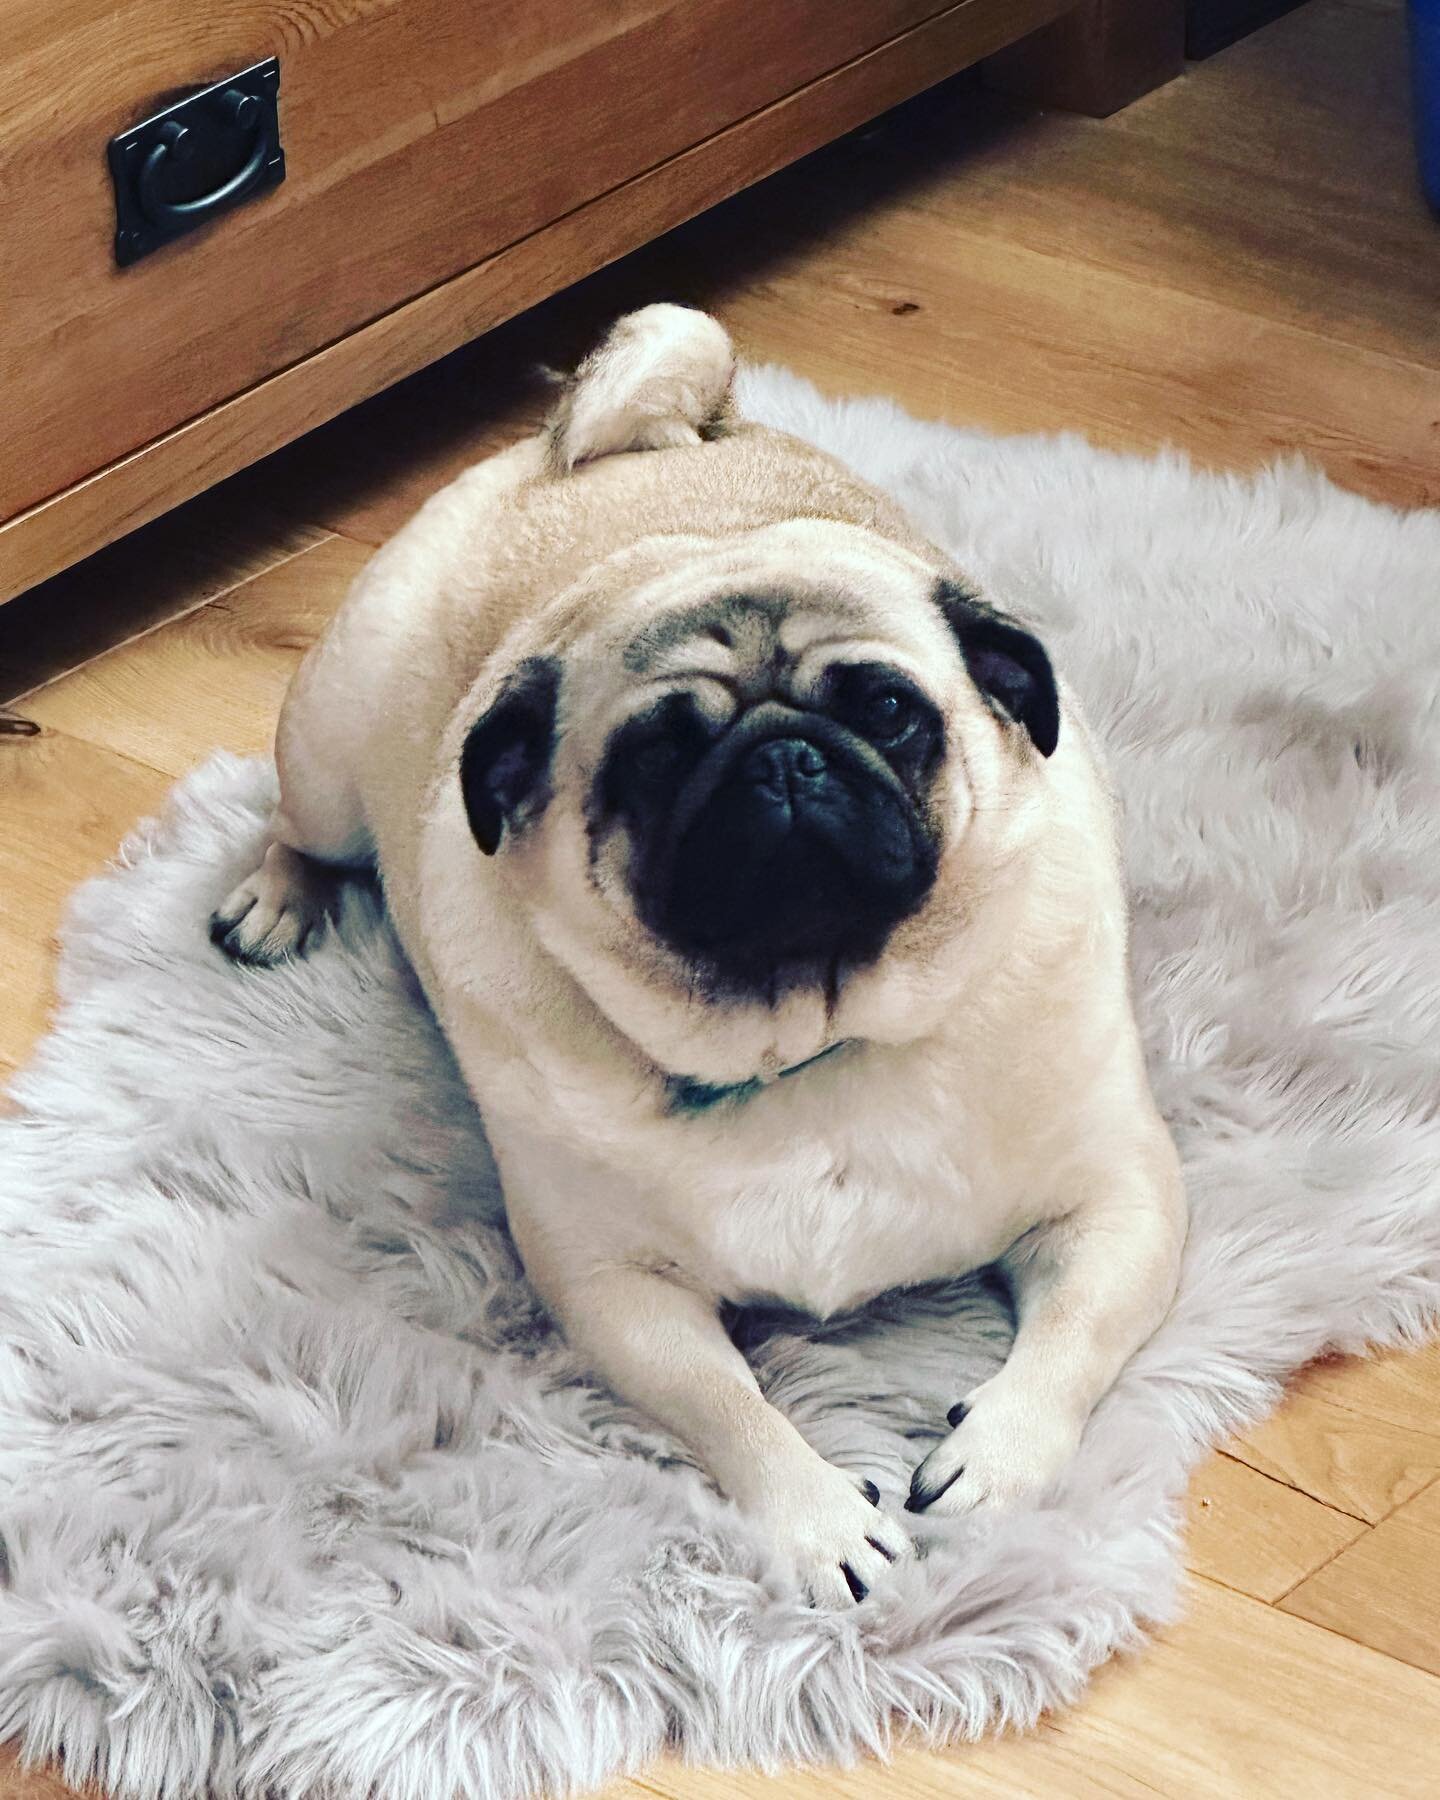 Home Comforts! 🐾🐶🐾 
A good fur rug is just the job for a resting pug!! 
Anyone else have pooch that loves the luxuries? Photos please? 🙏🐾